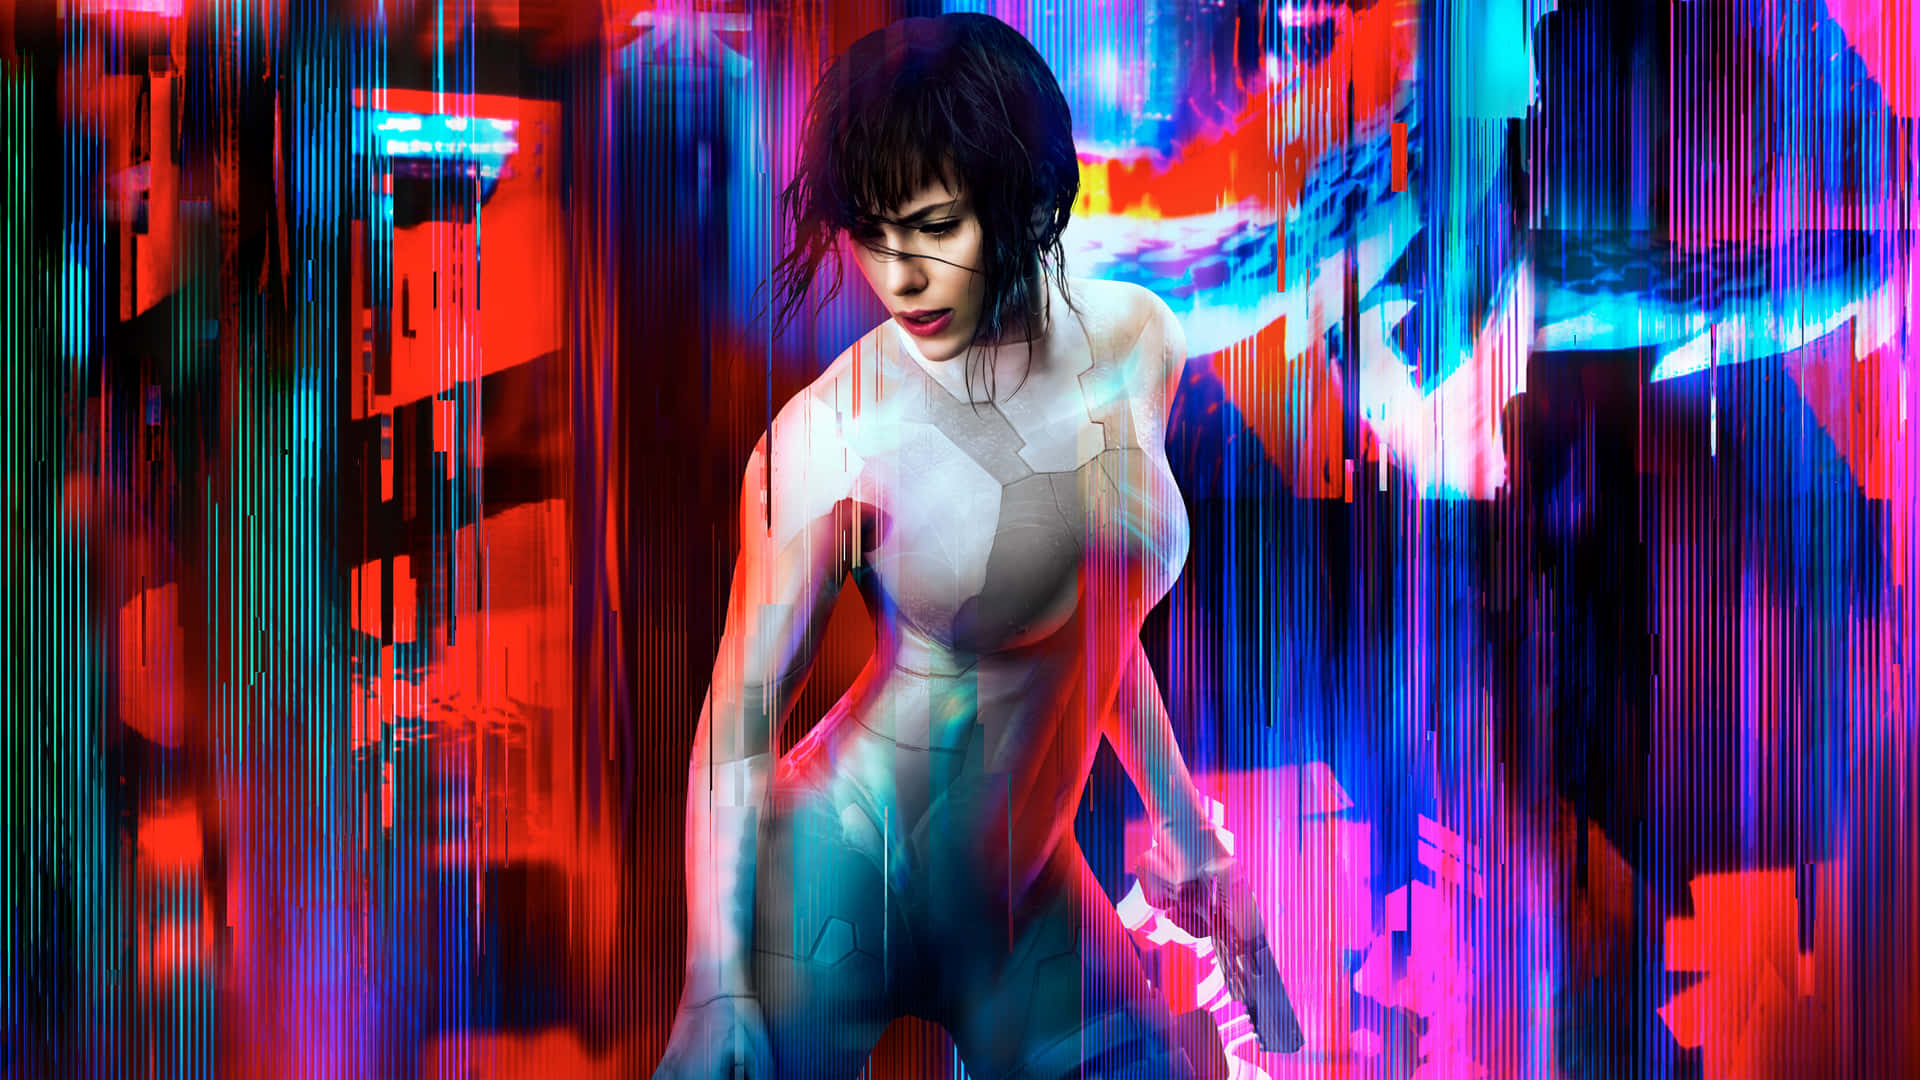 Motoko Kusanagi in Ghost In The Shell ready to fight